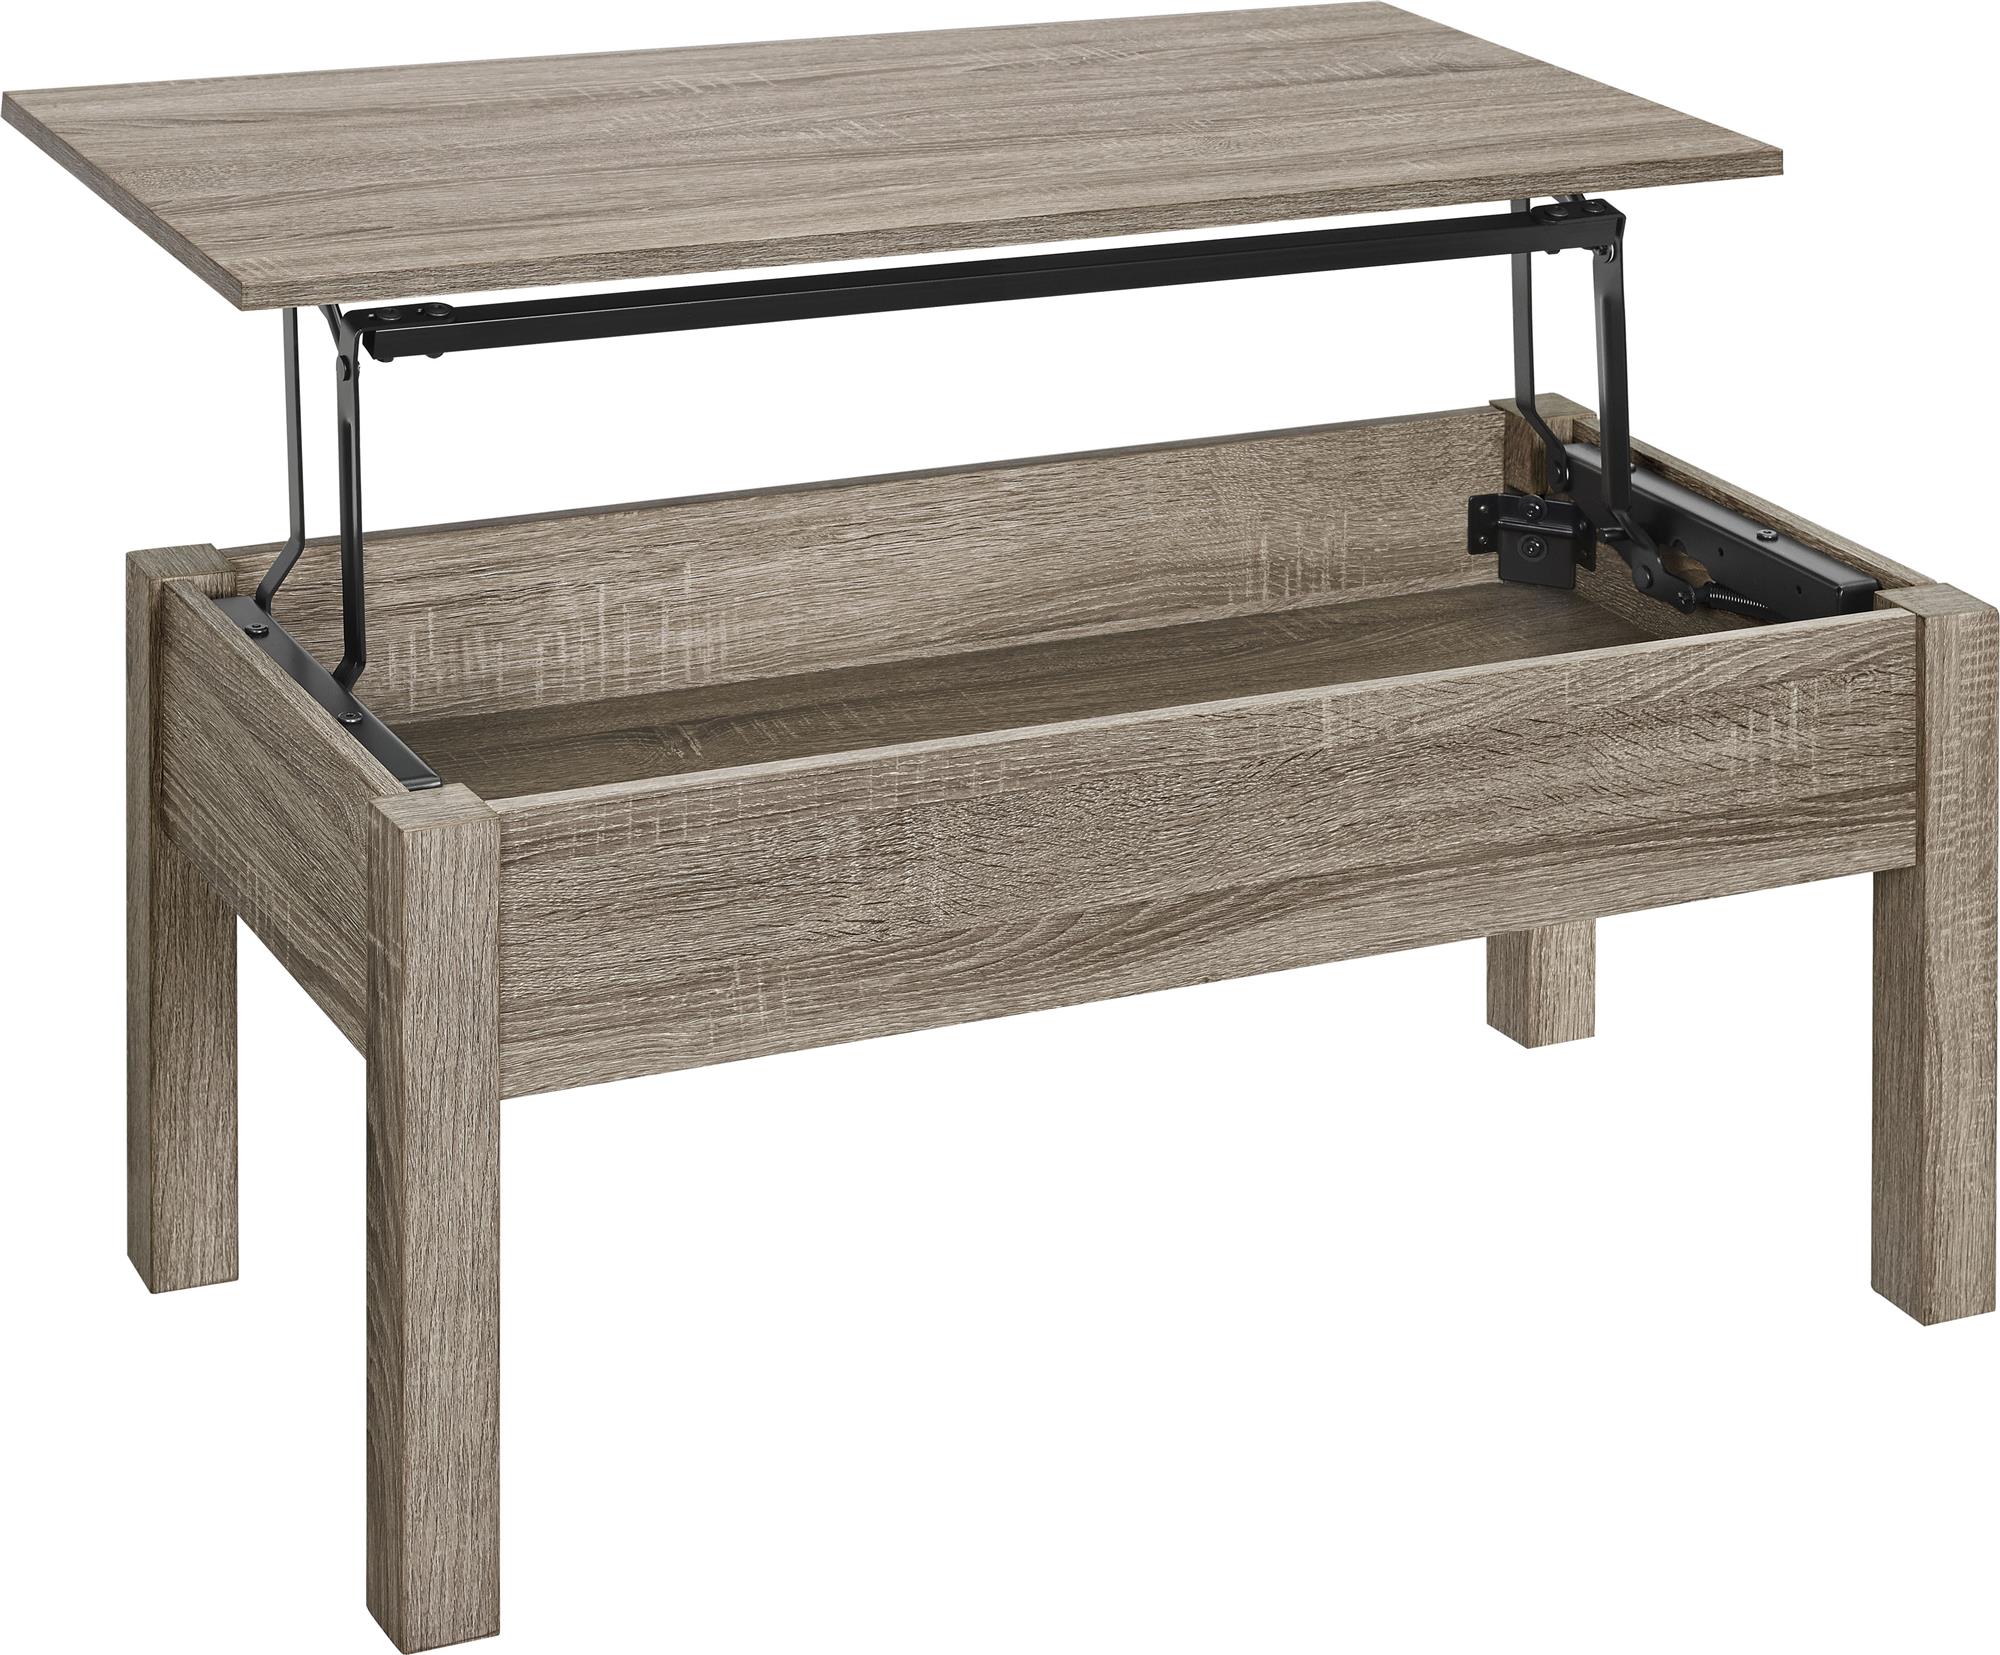 Mainstays Parson's Lift-Top Coffee Table, Sonoma Oak - image 7 of 8